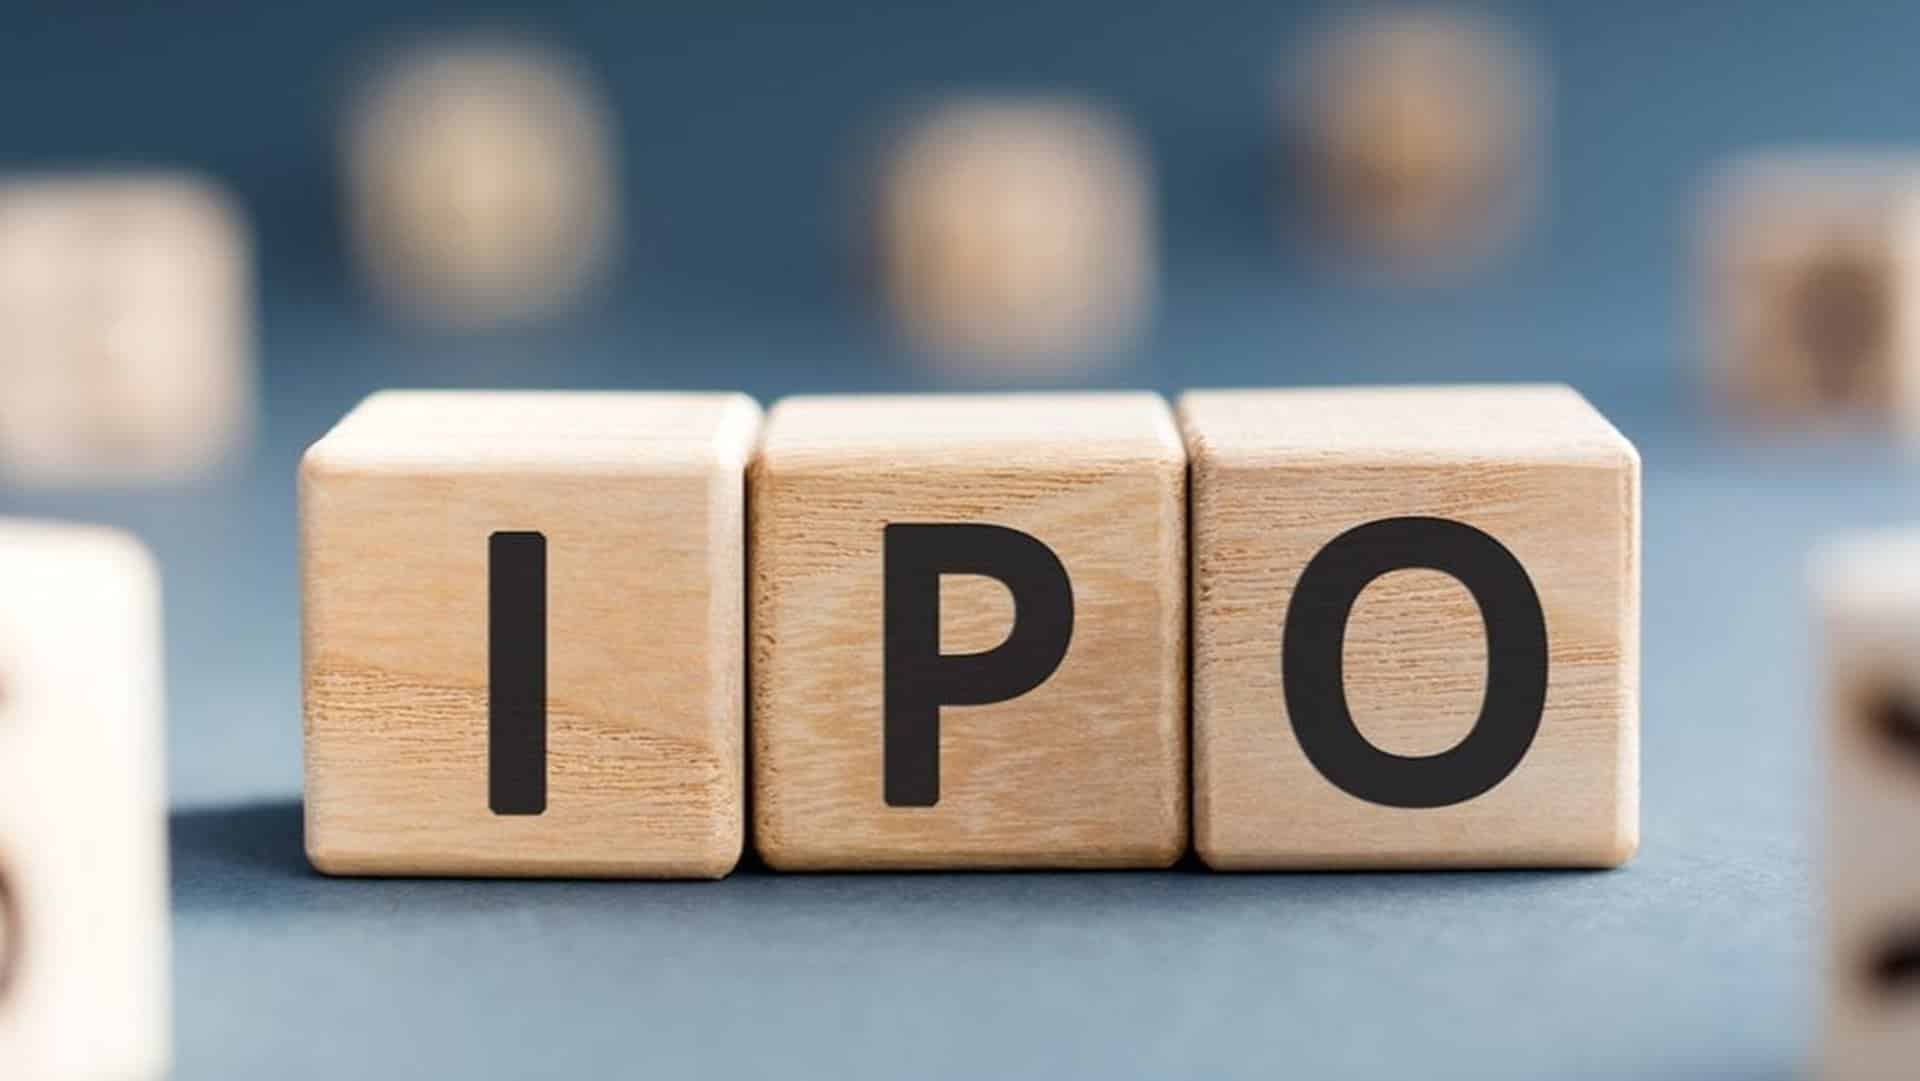 LIC IPO: Govt likely to invite bids from merchant bankers this month